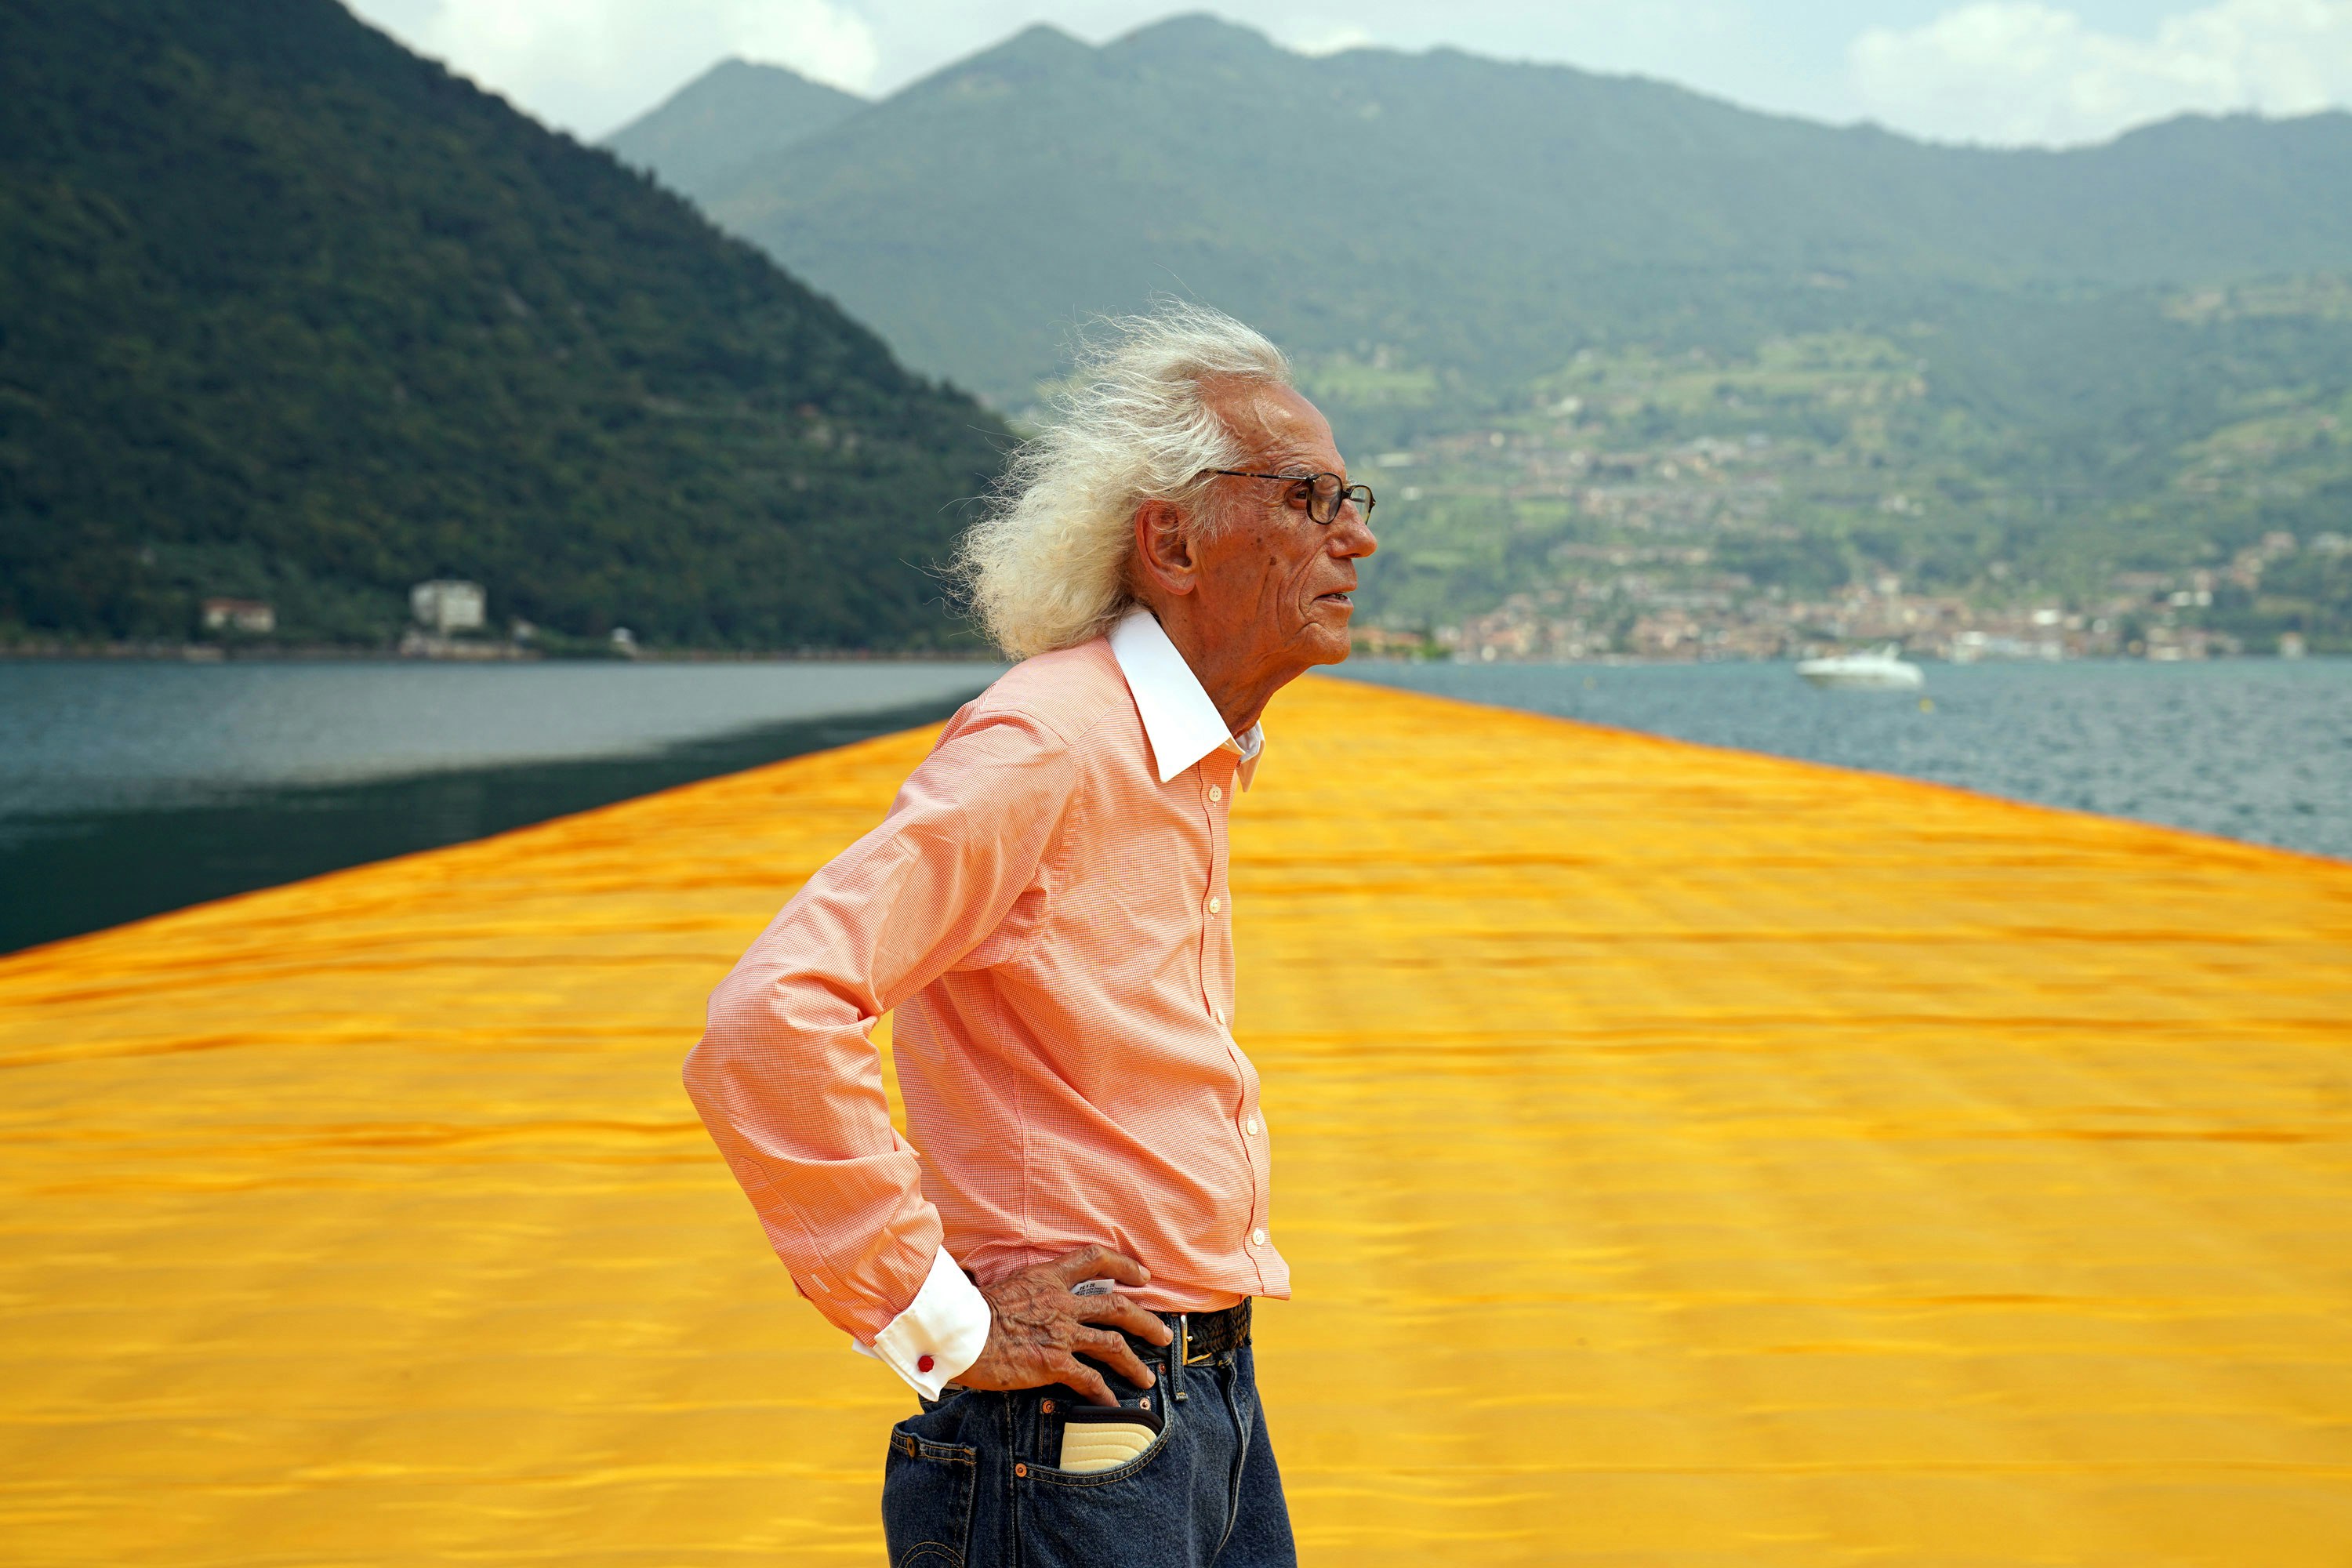 Christo at The Floating Piers, June 2016. Courtesy Christo and Jeanne-Claude. Photo: Wolfang Volz.